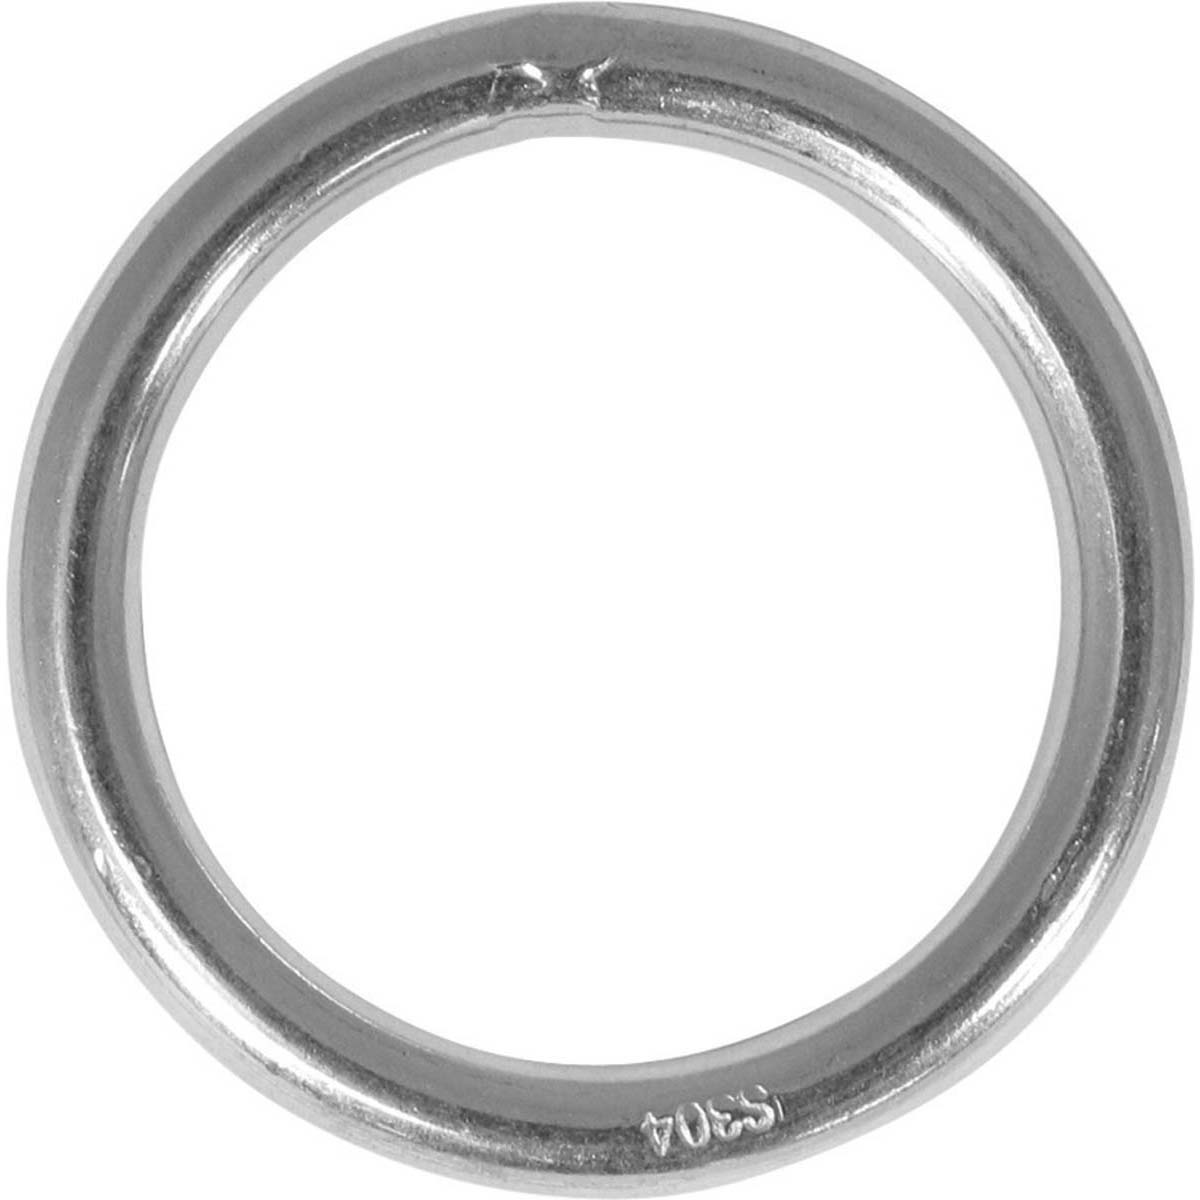 Blueline Stainless Steel Ring 6x40mm